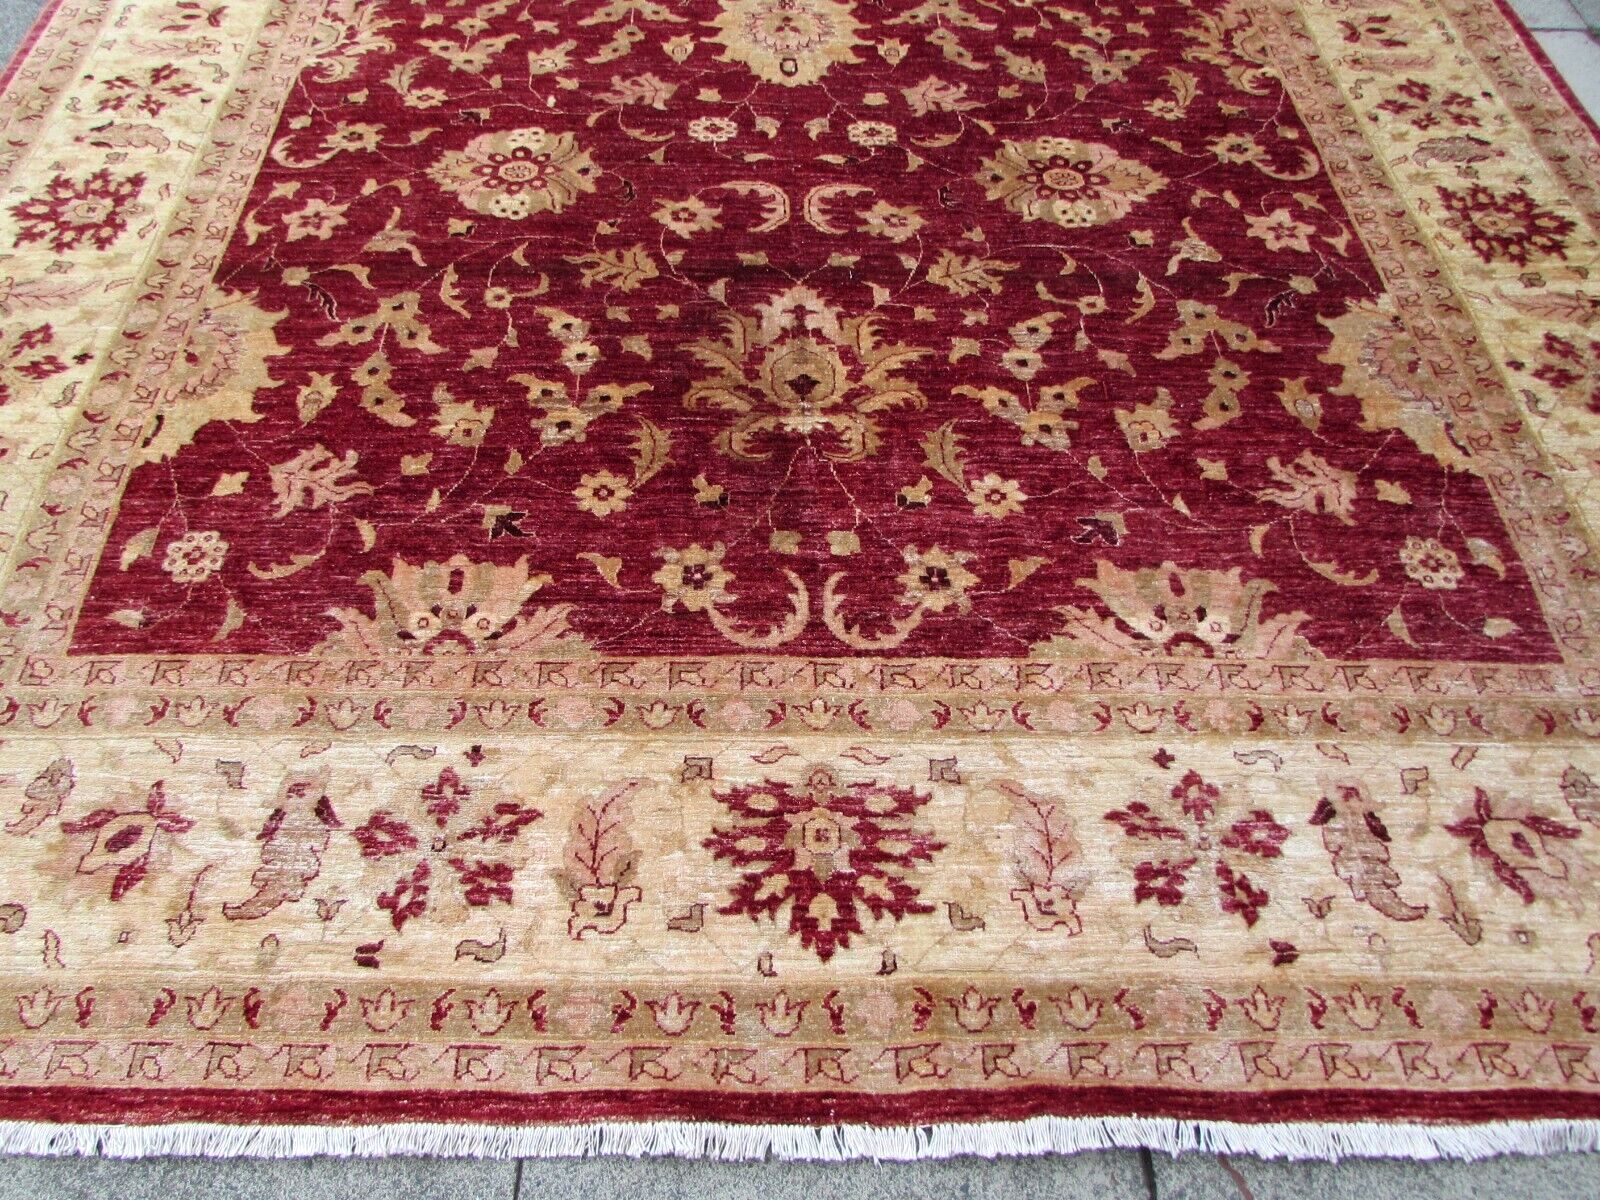 Close-up of the intricate Zigler pattern on the rug